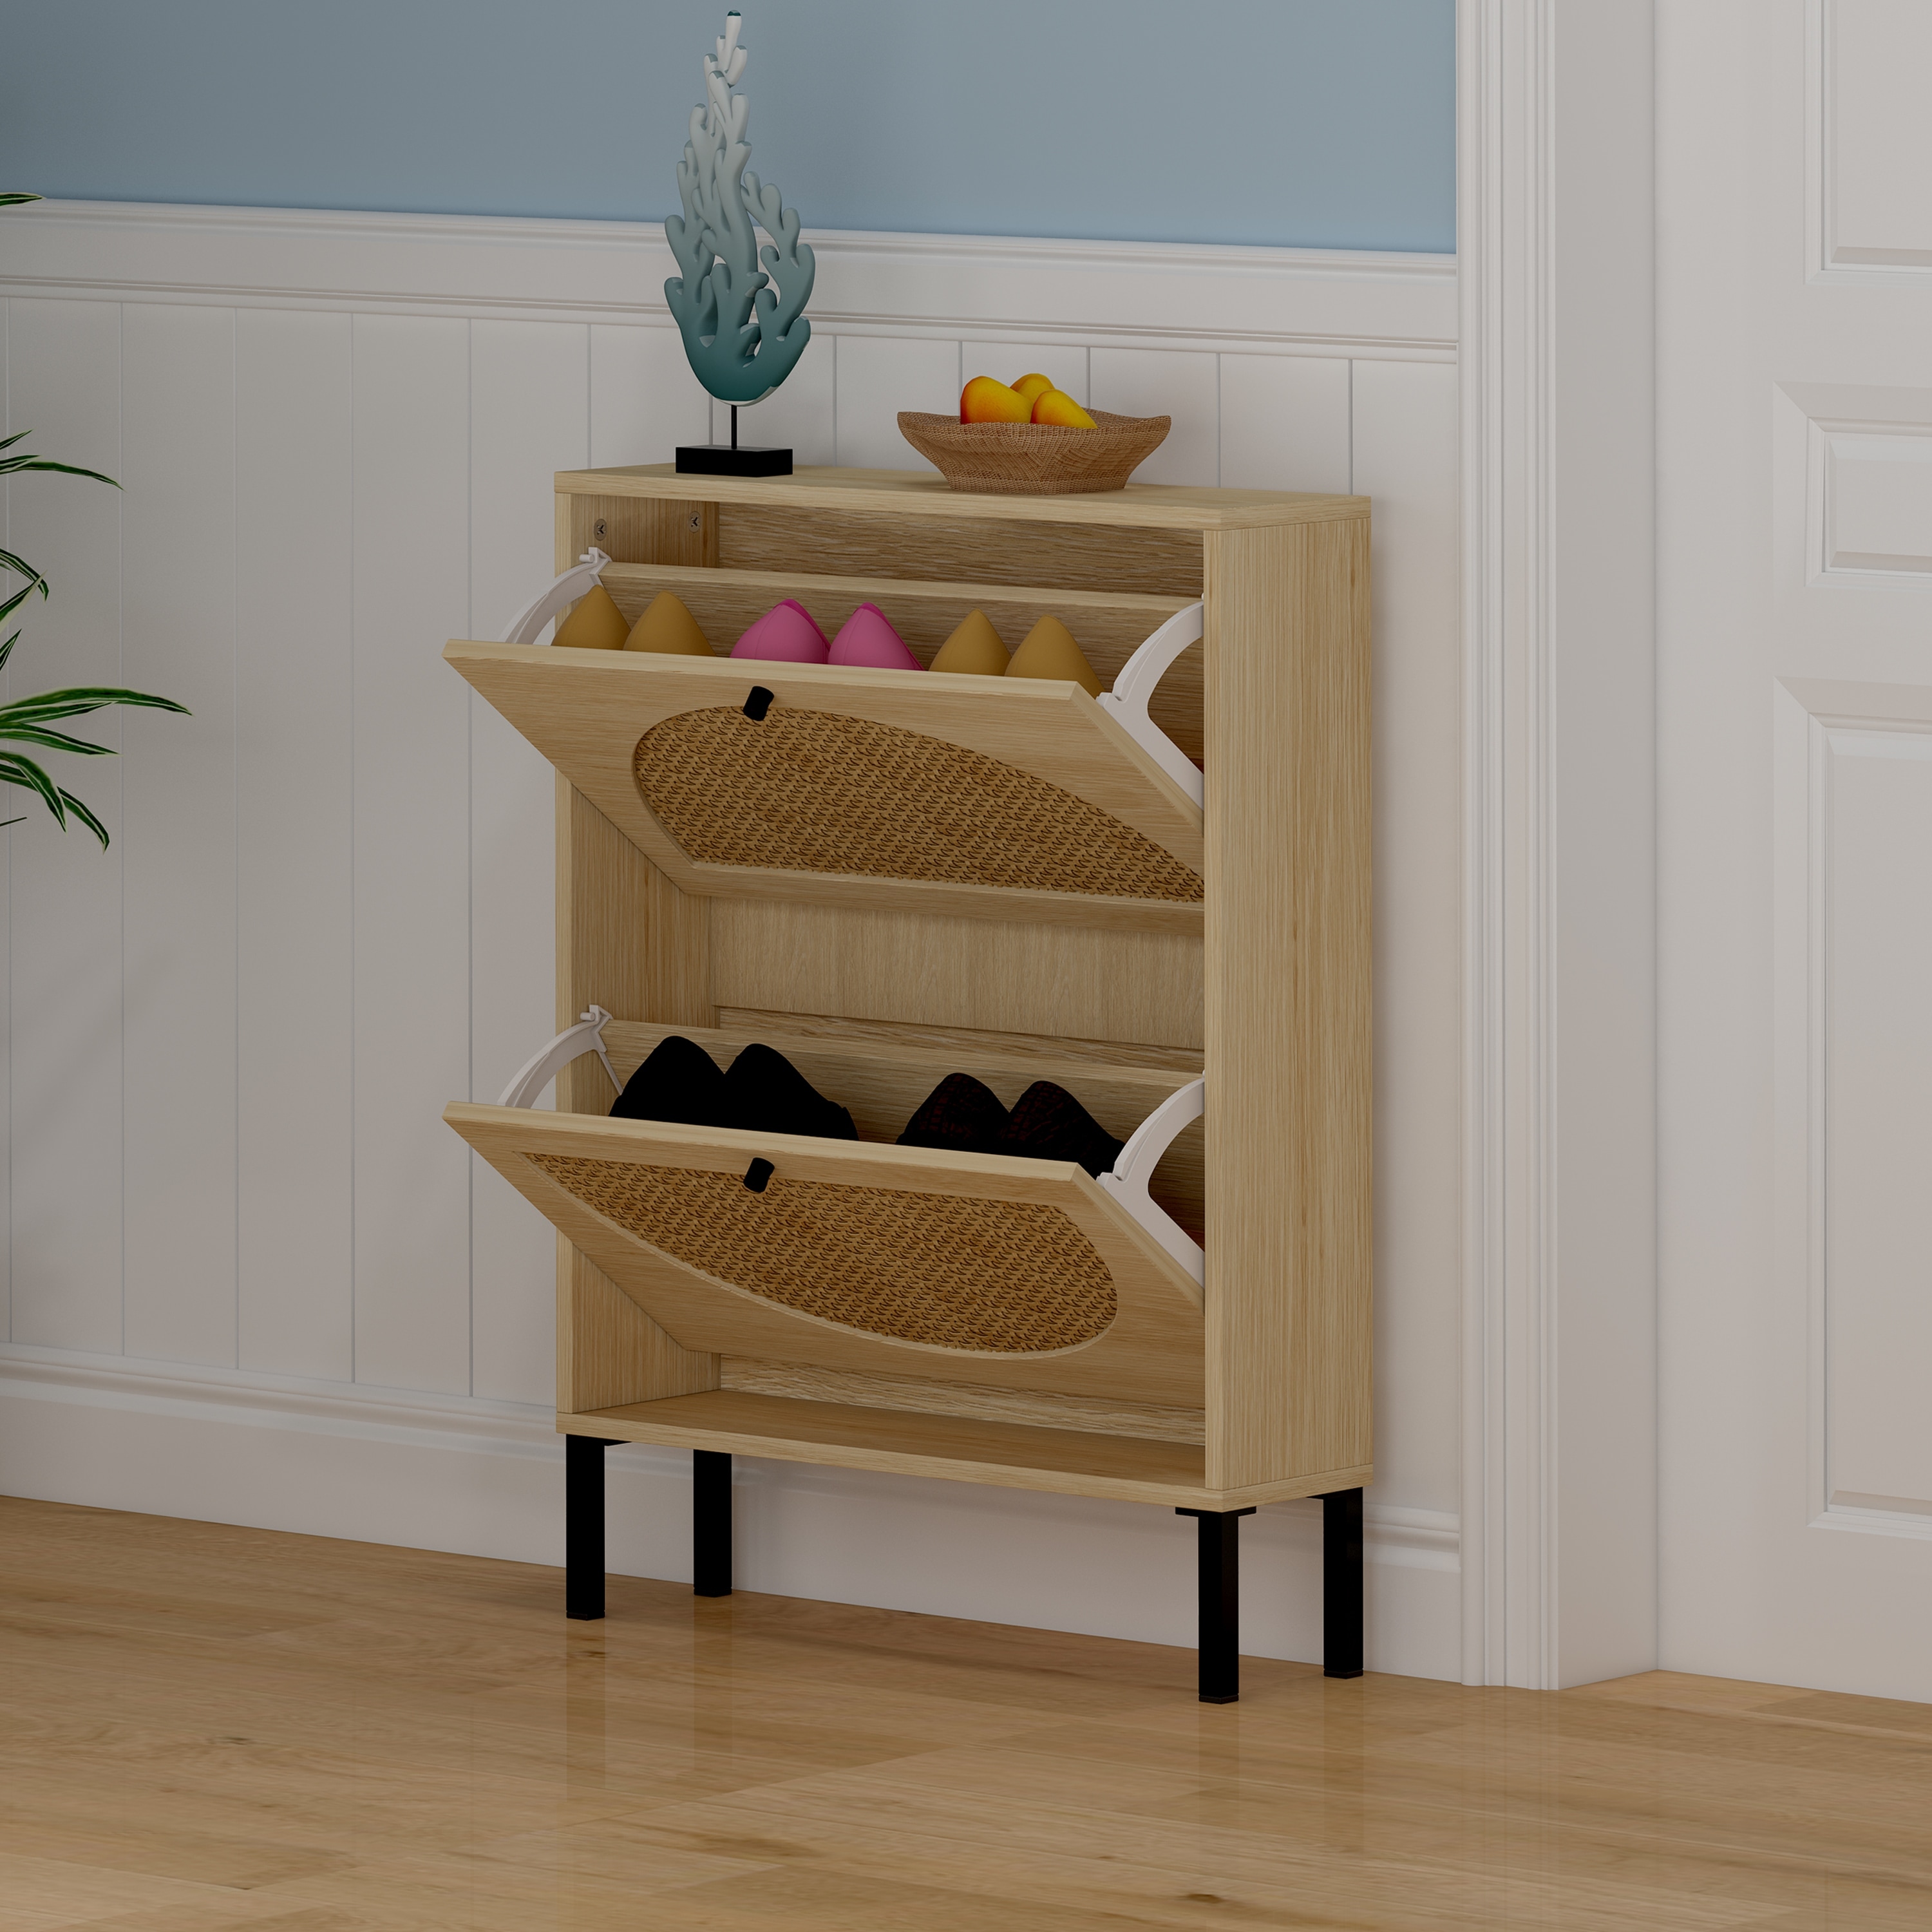 https://ak1.ostkcdn.com/images/products/is/images/direct/c5bf9f43d57e7555bffab7633dcd6a8d43ed45c9/Rattan-Shoe-Organizer-Storage-Cabinet-Natural-Wood.jpg